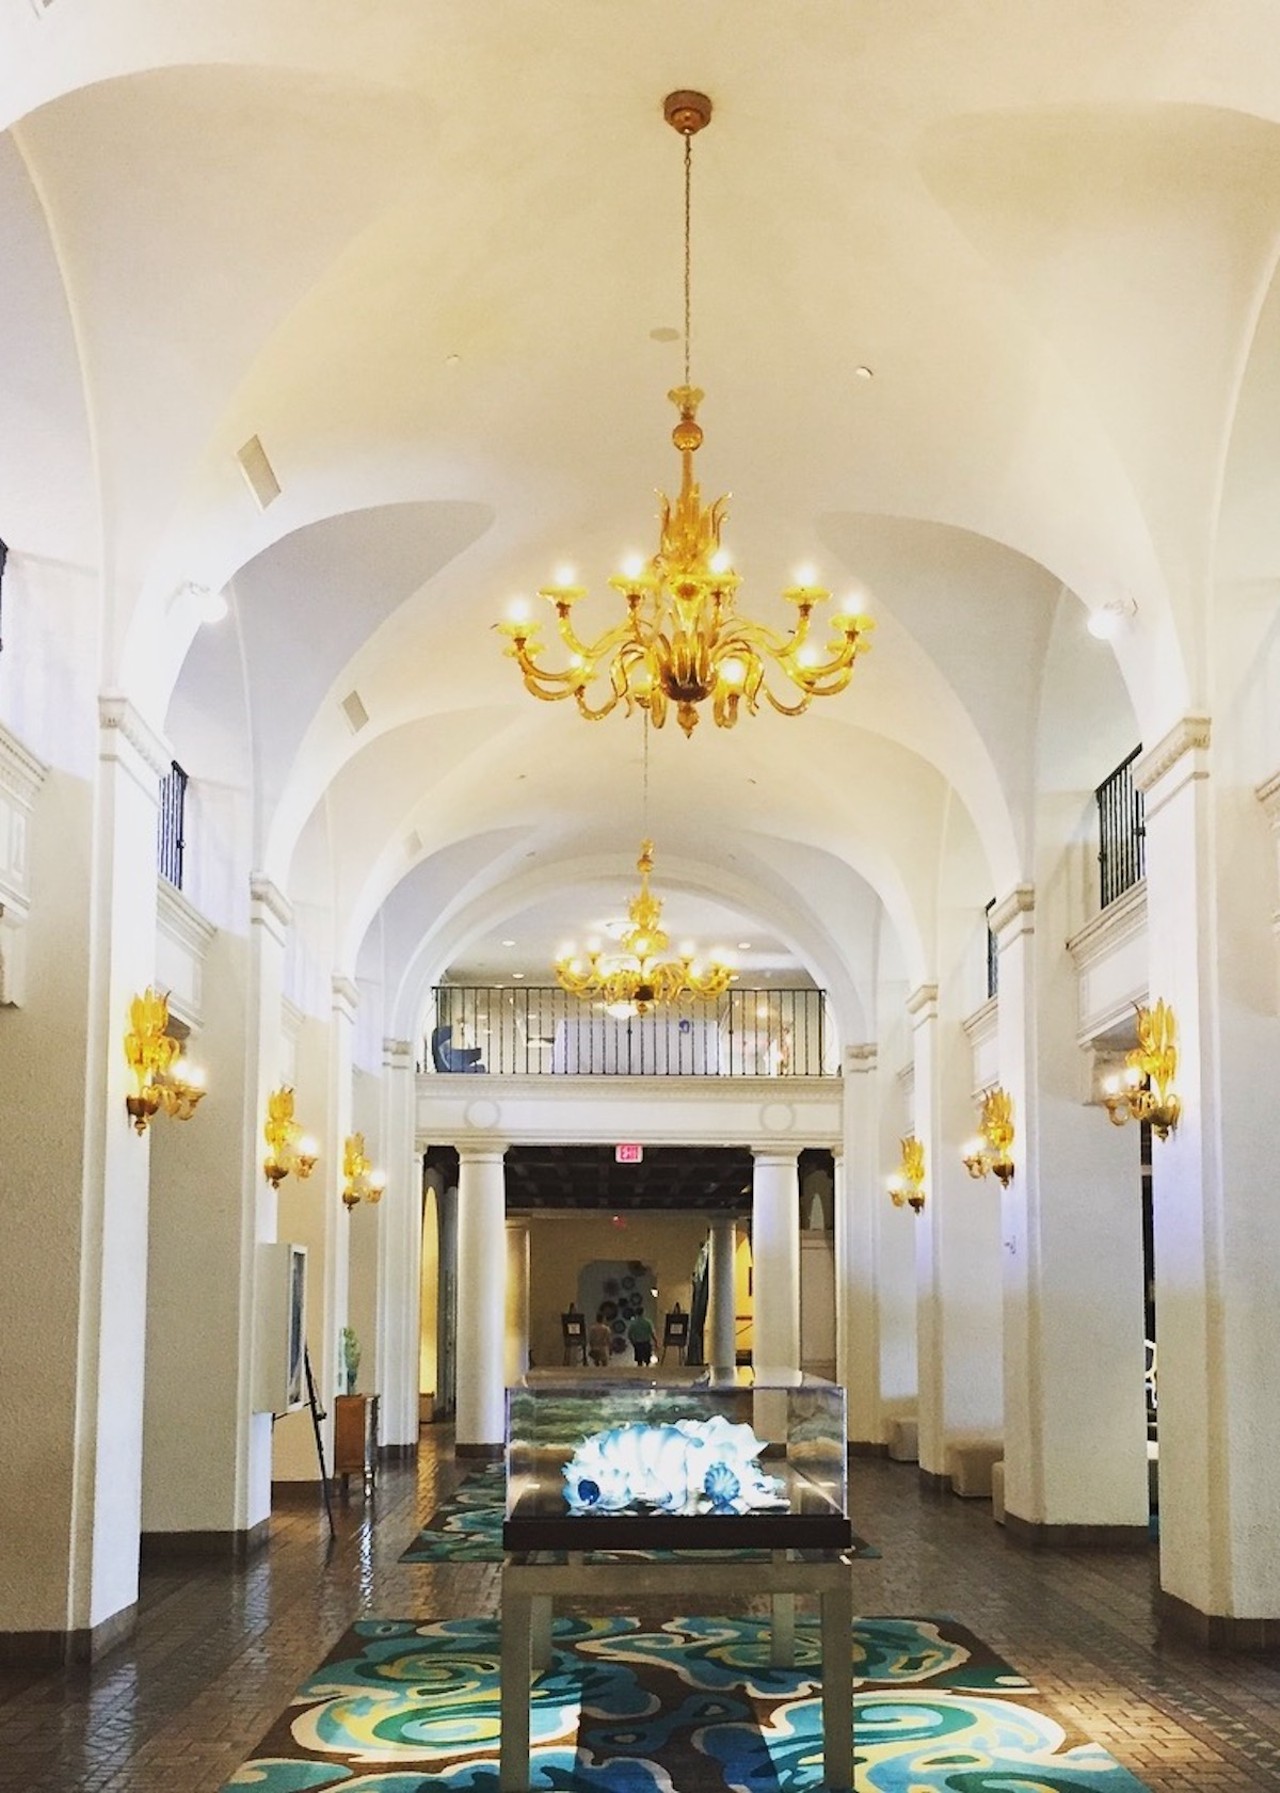 Go behind the scenes at the Vinoy501 5th Ave. NE, St. Petersburg. (727) 894-1000 They will not talk about ghosts on this tour, but it's still worth taking to learn about the story of St. Petersburg's pink palace.